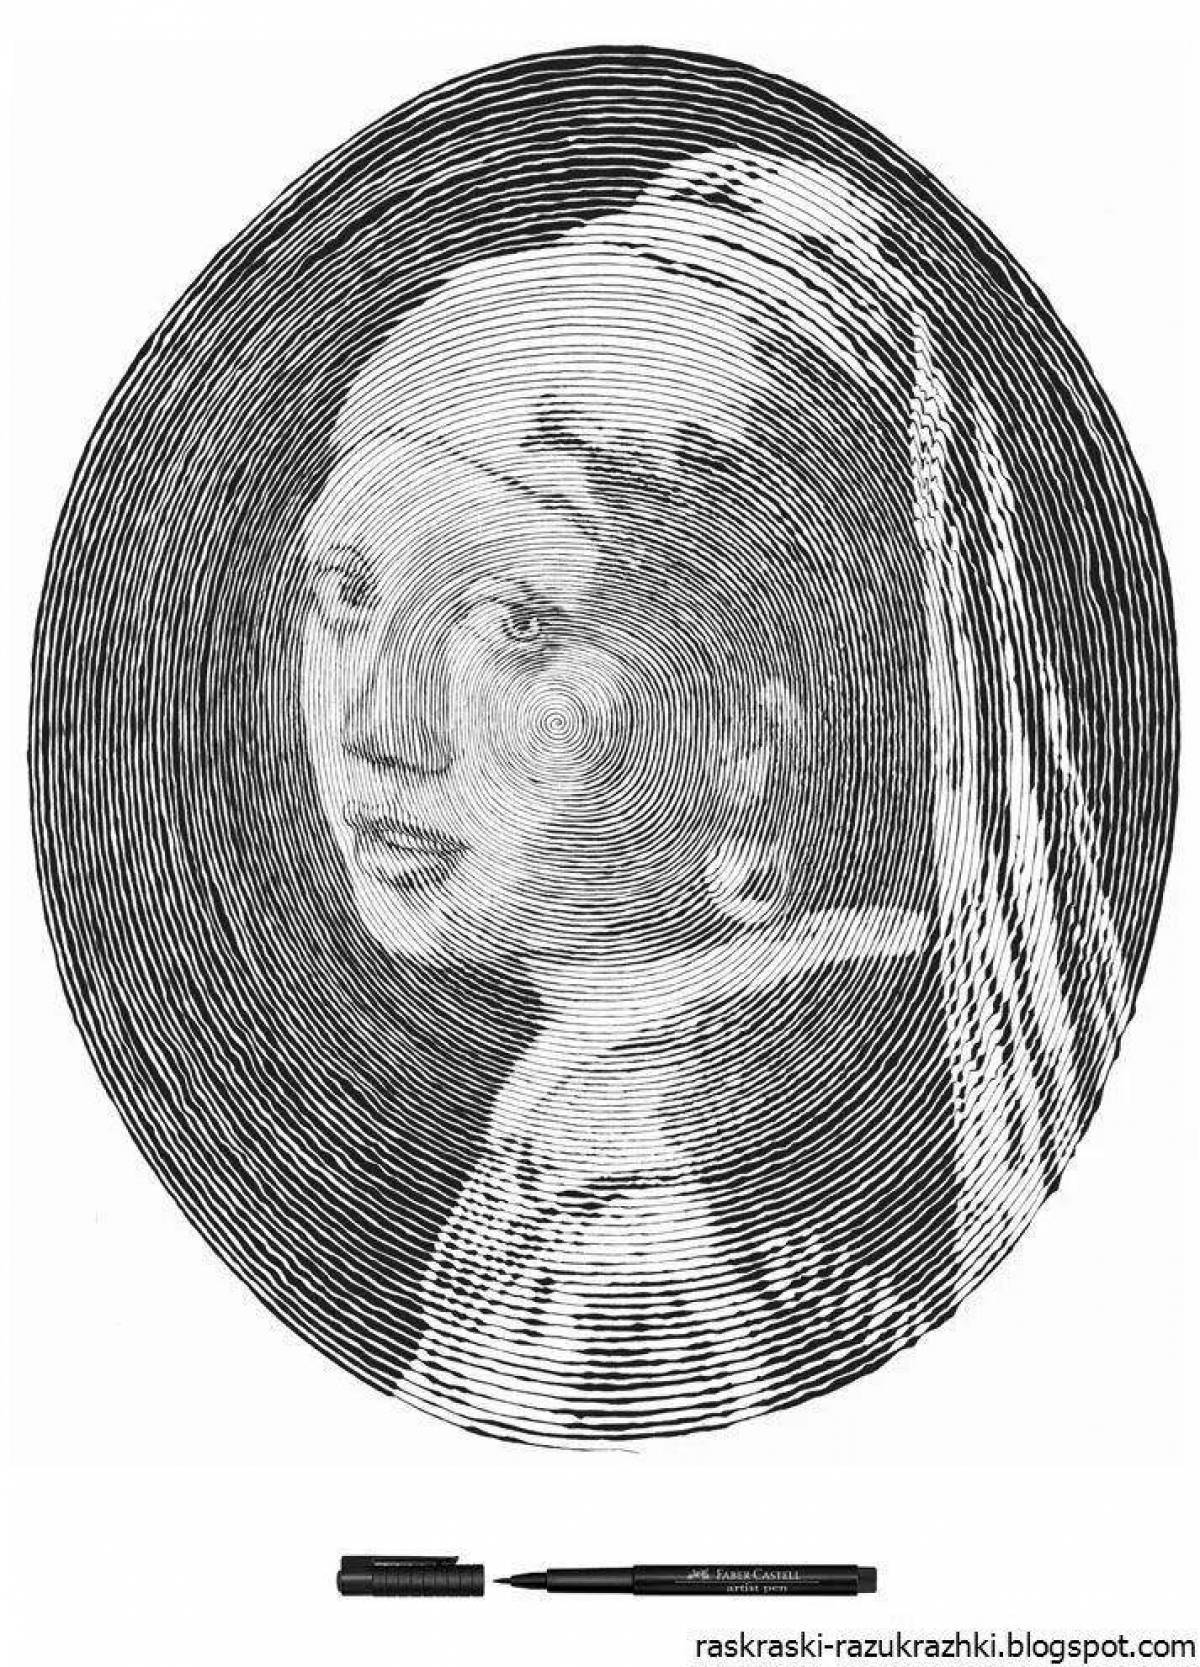 Attractive circular portrait from a photo